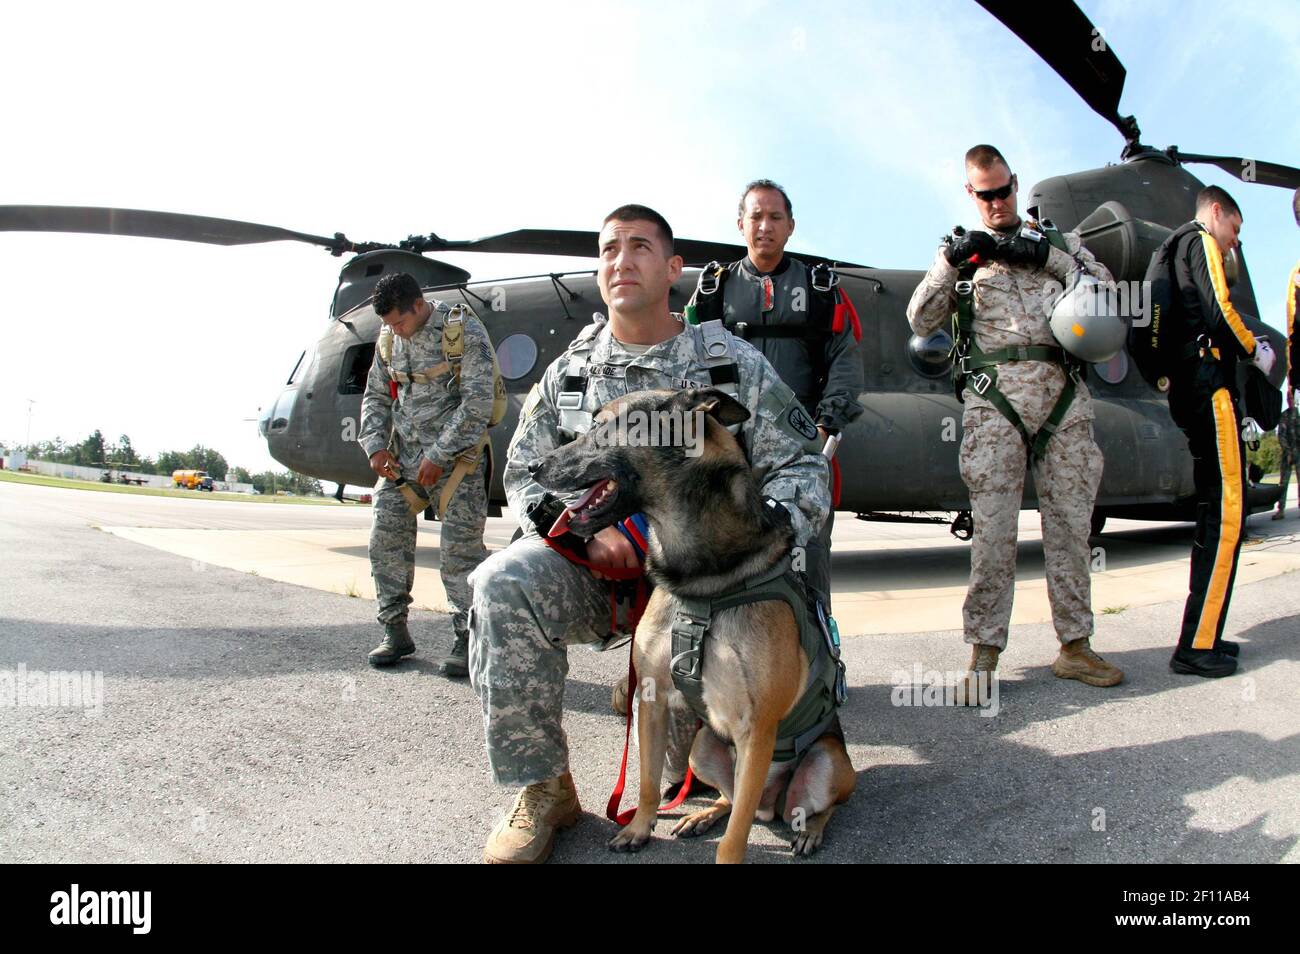 18 September 2009 - Fort Leonard Wood, Missouri - U.S. Army 1st Sgt. Chris Lalonde, center, with military working dog, Sgt. Maj. Fasco, and jumpmaster Kirby Rodriguez, behind them, along with other service jumpers pose for a picture before their historical first tandem airborne jump from an altitude of 12,500 feet on Fort Leonard Wood, Mo. Sept. 18, 2009. Lalonde is assigned to Company D, 701st Military Police Battalion; Rodriguez is assigned to the 342nd Training Squadron. Photo Credit: Vince Vander Maarel/DOD/Sipa Press/0910072042 Stock Photo